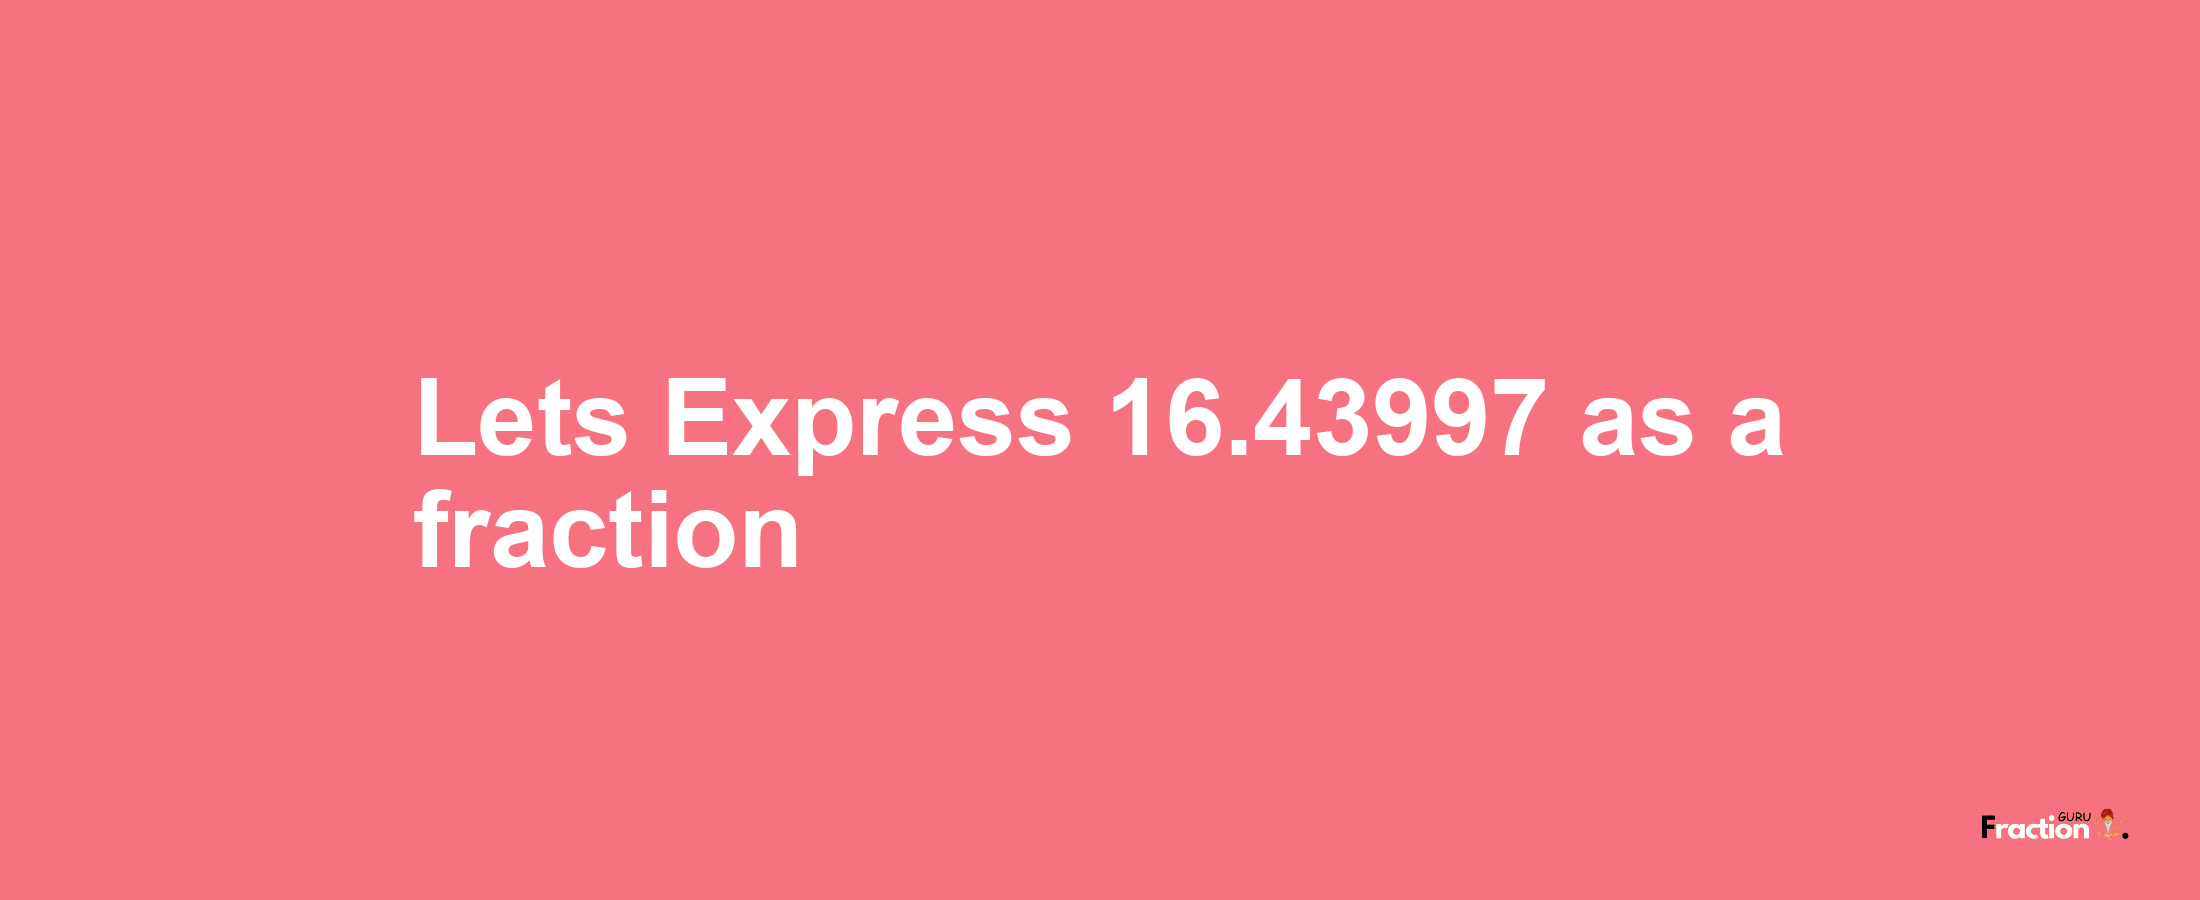 Lets Express 16.43997 as afraction